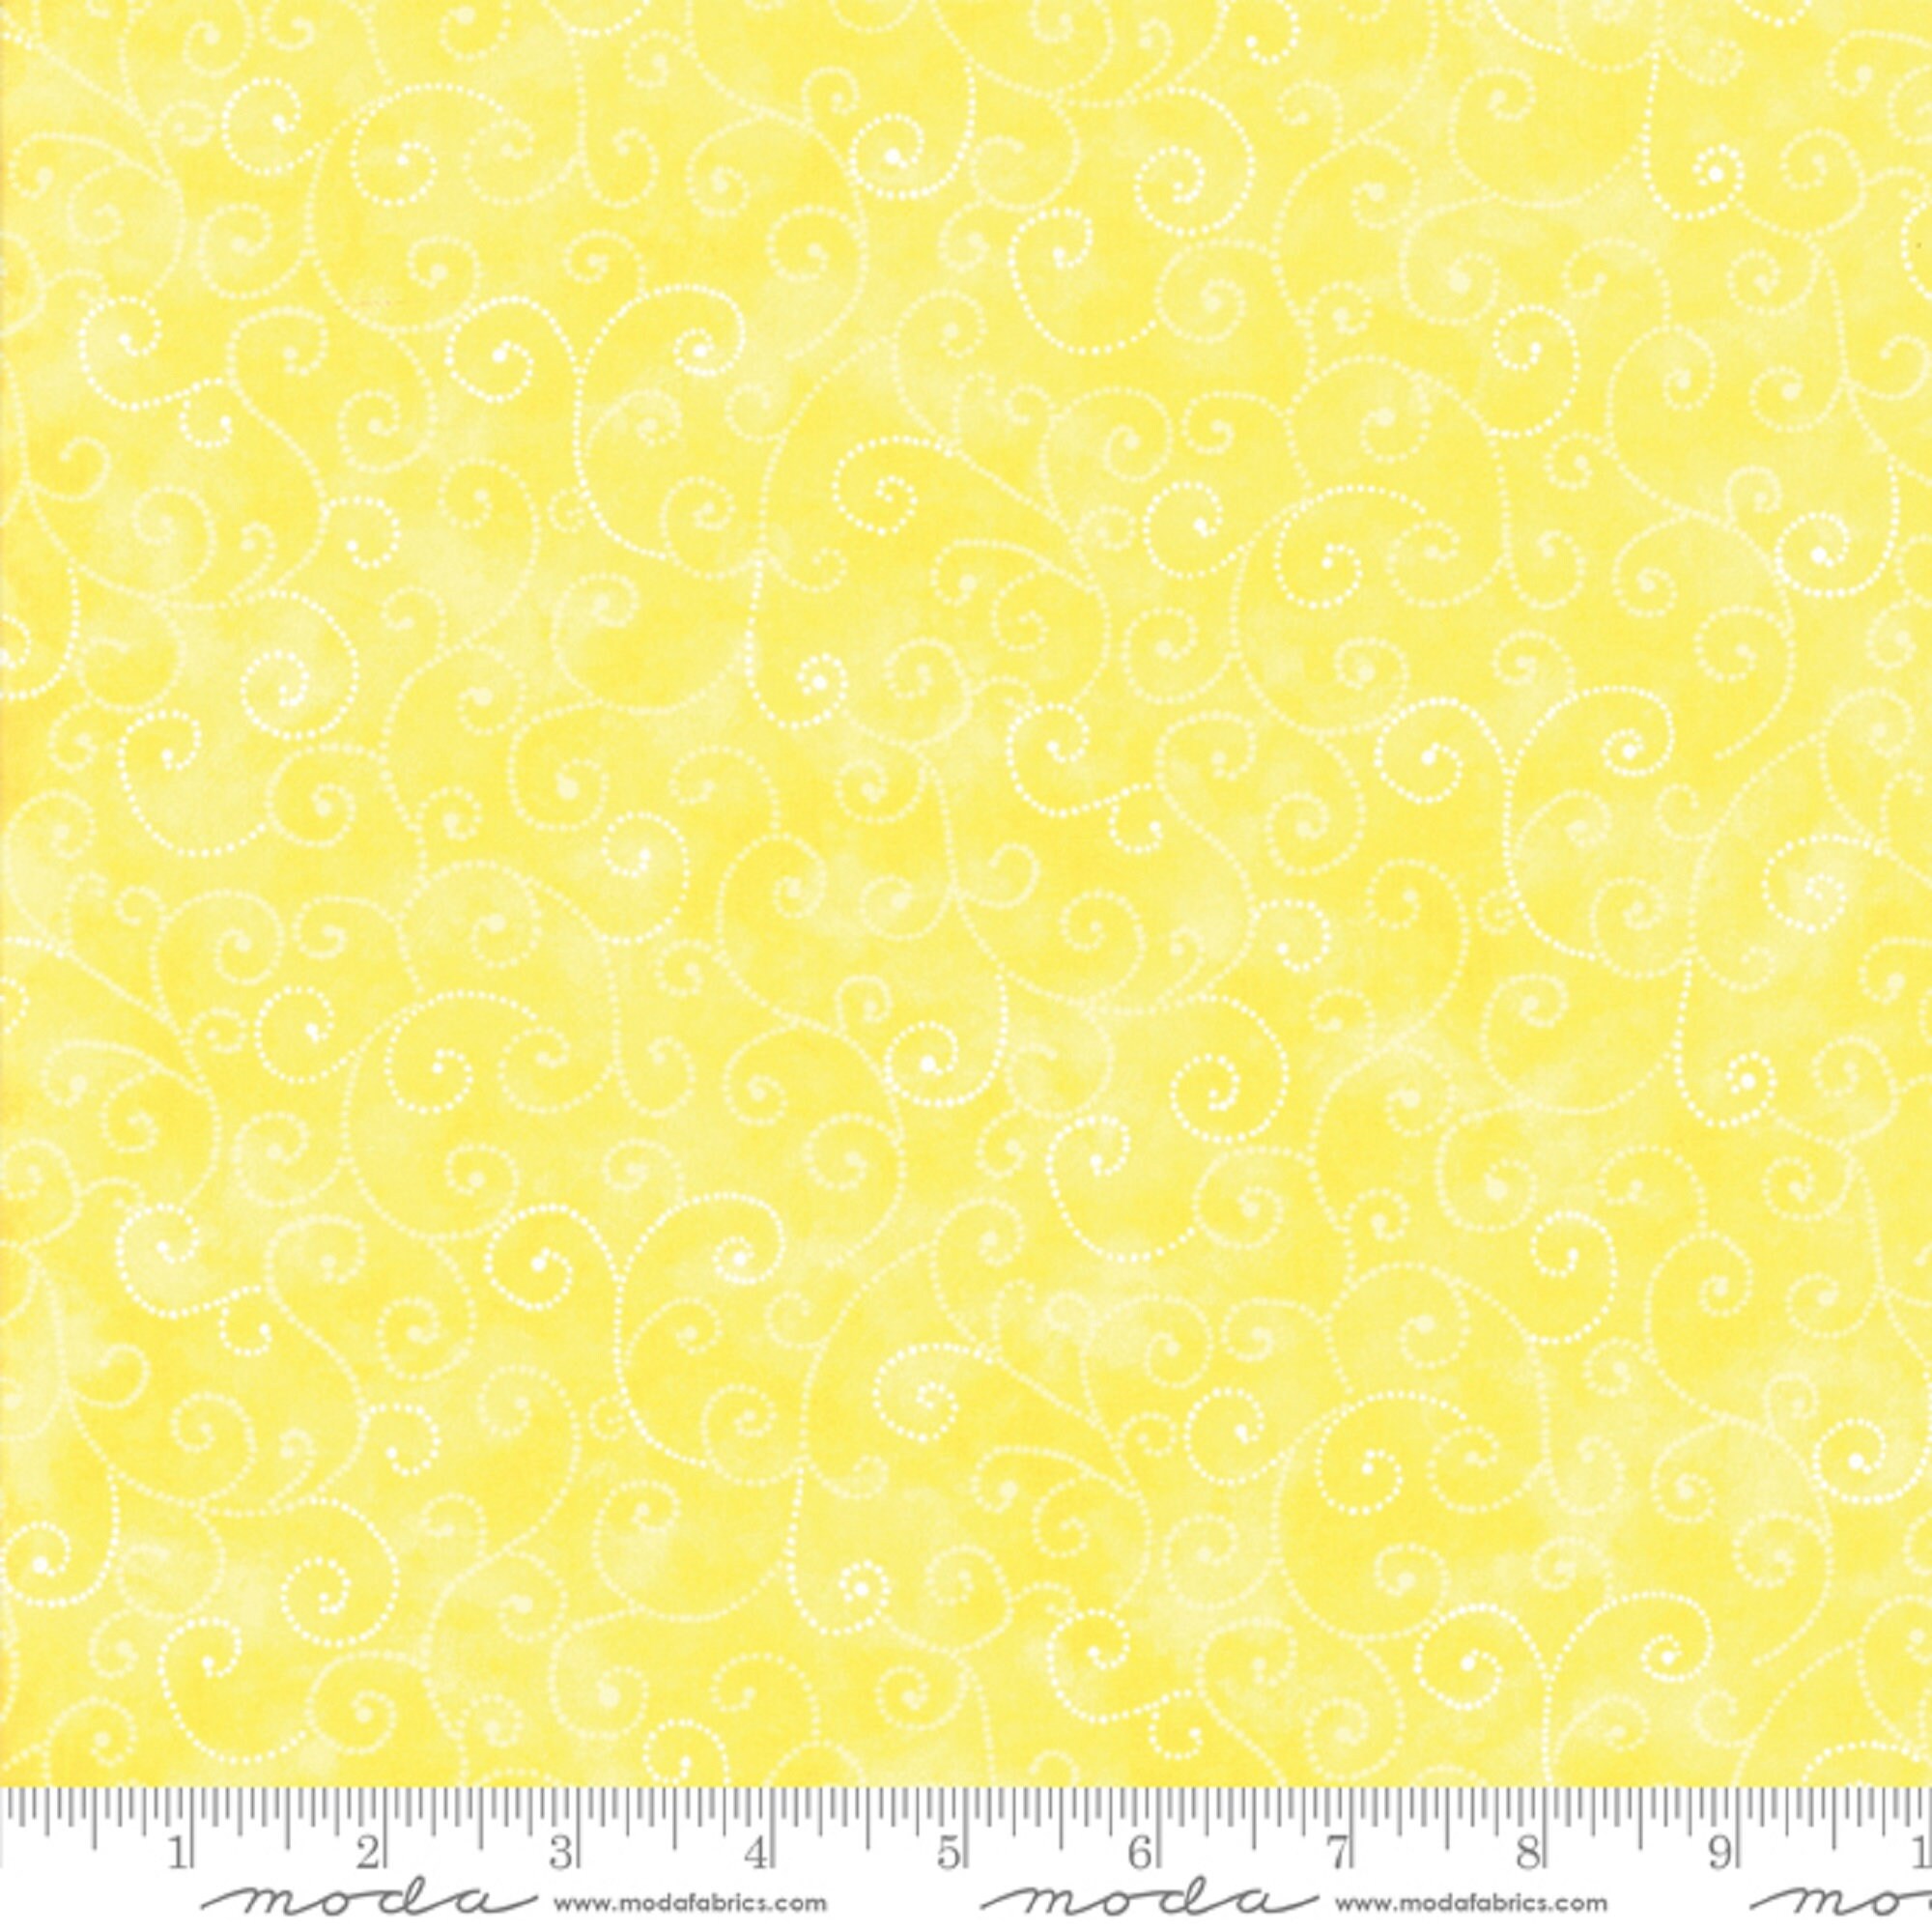 Kite Flying, Blue Yellow, Quilt Fabric Sold by the Yard, Baby